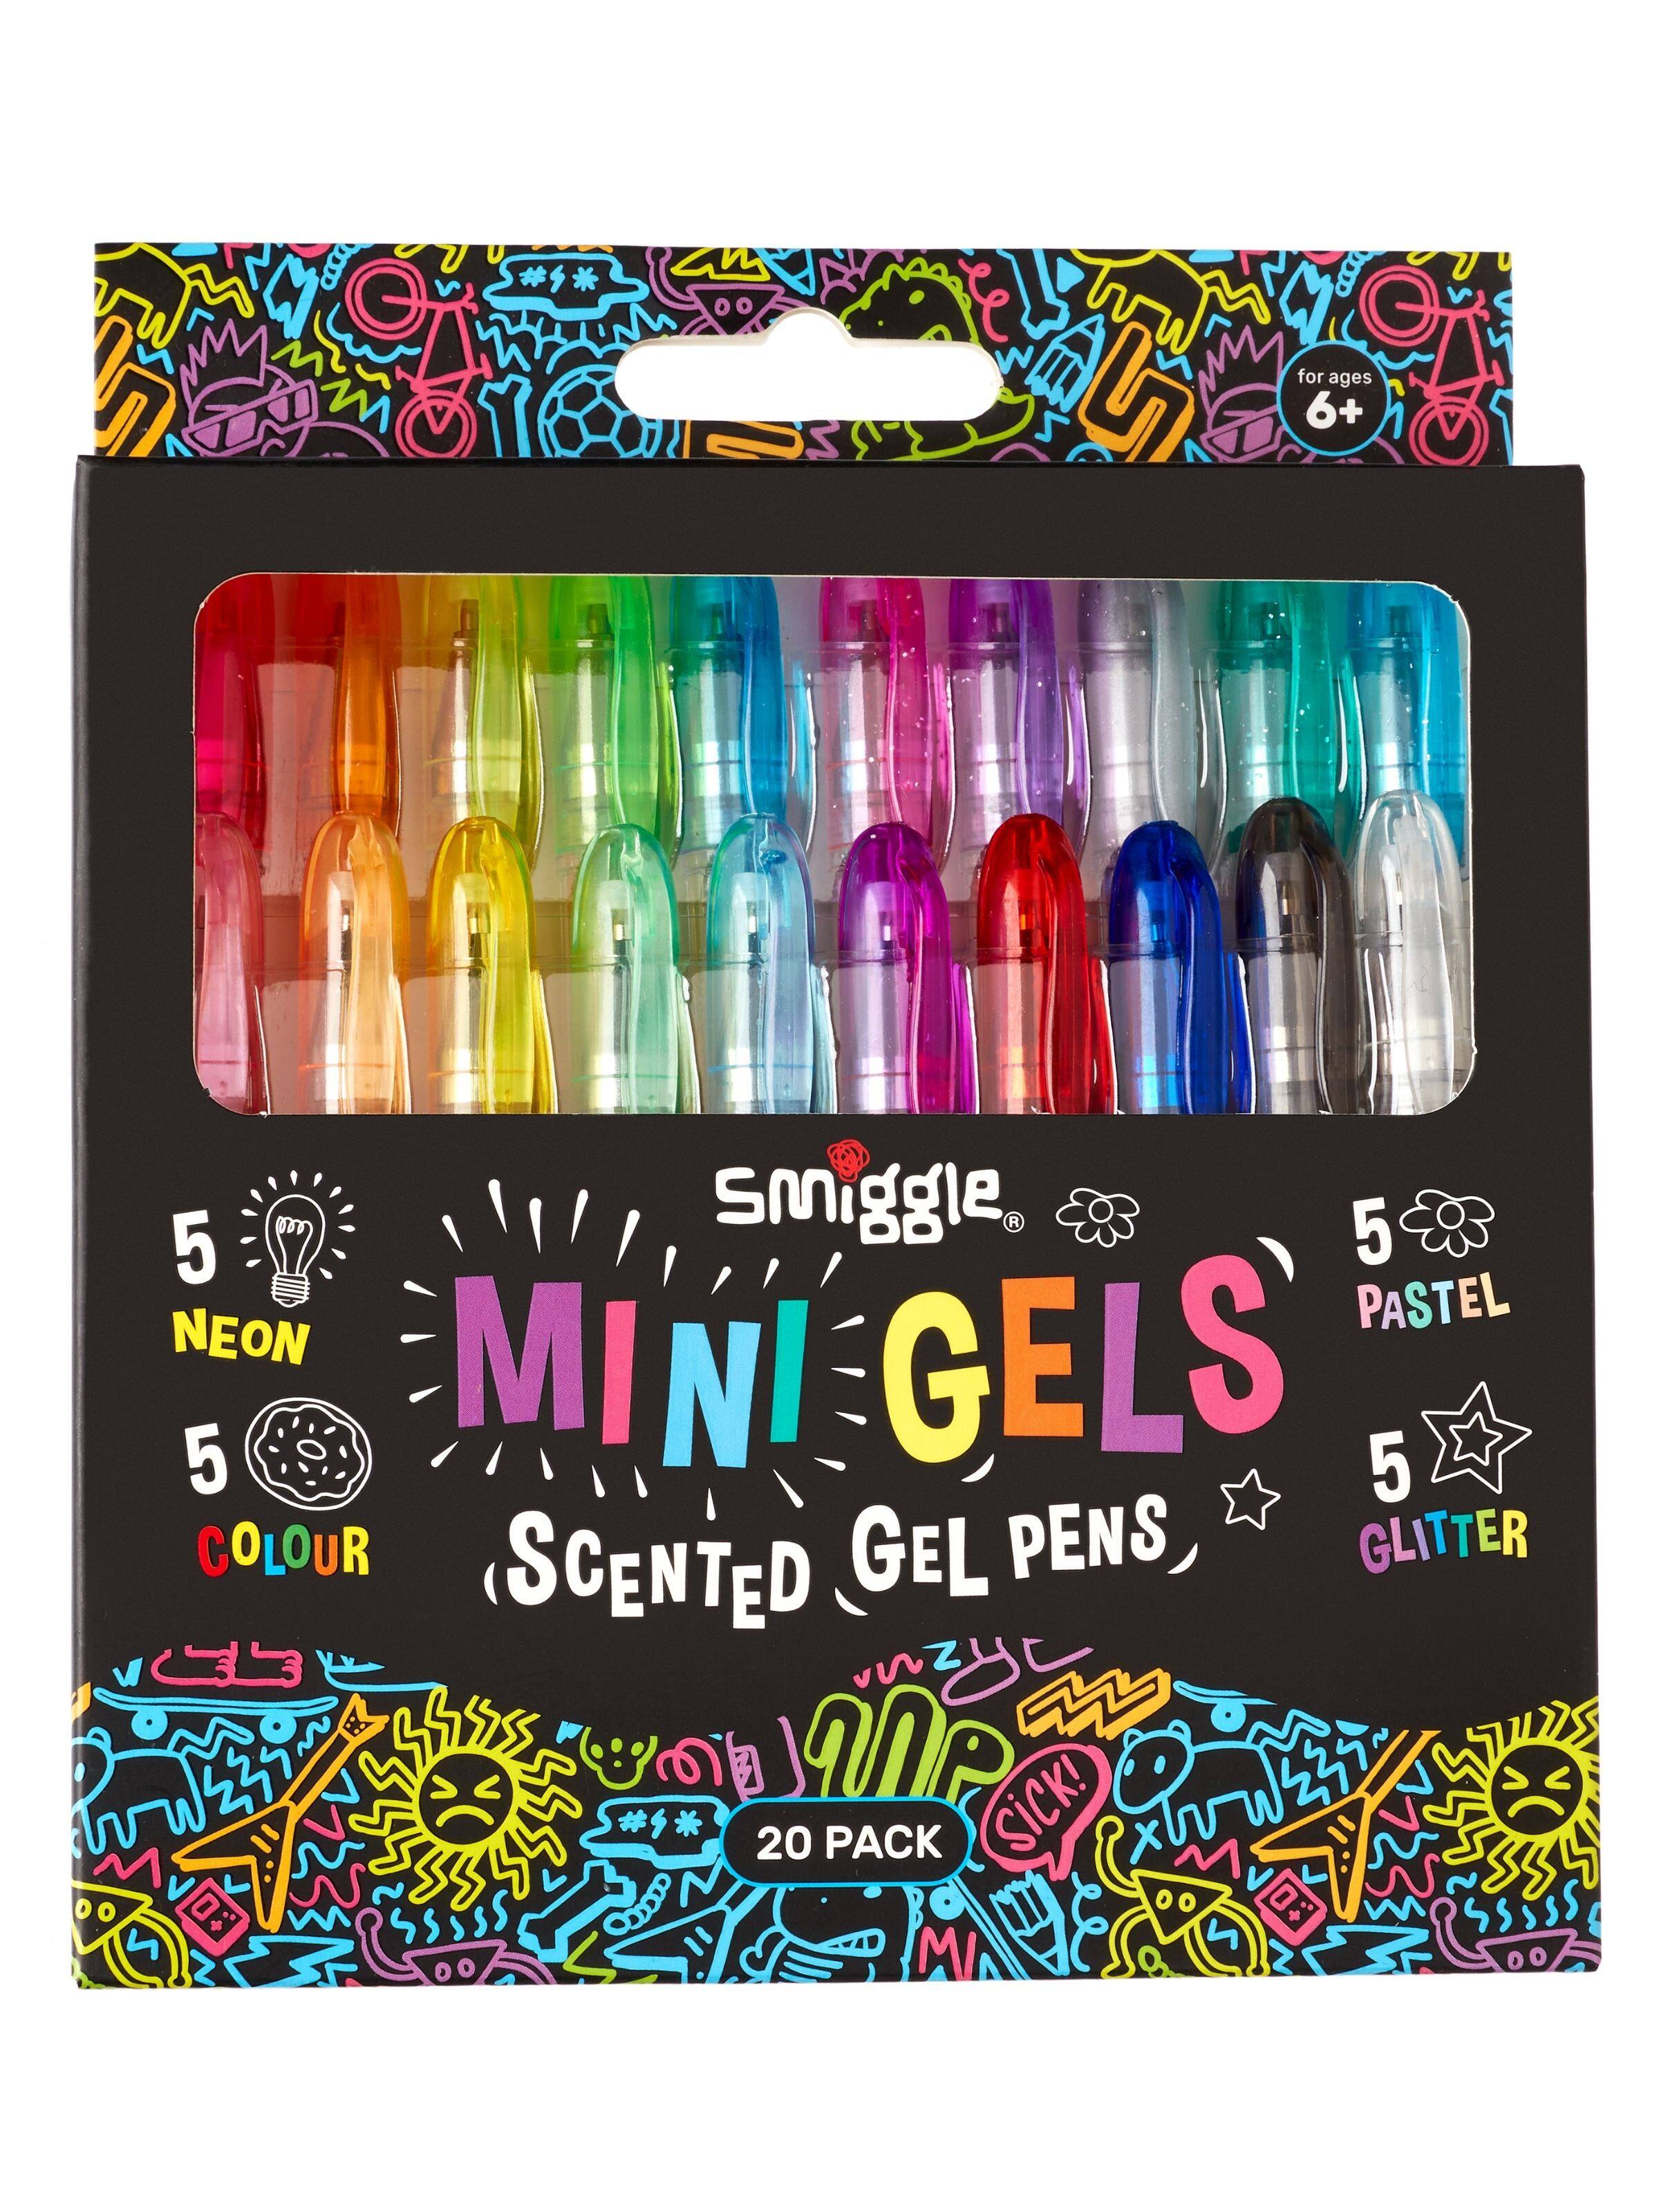 Getthis4ME - Scented Mini Gel Pens X20. Which Smiggle pen